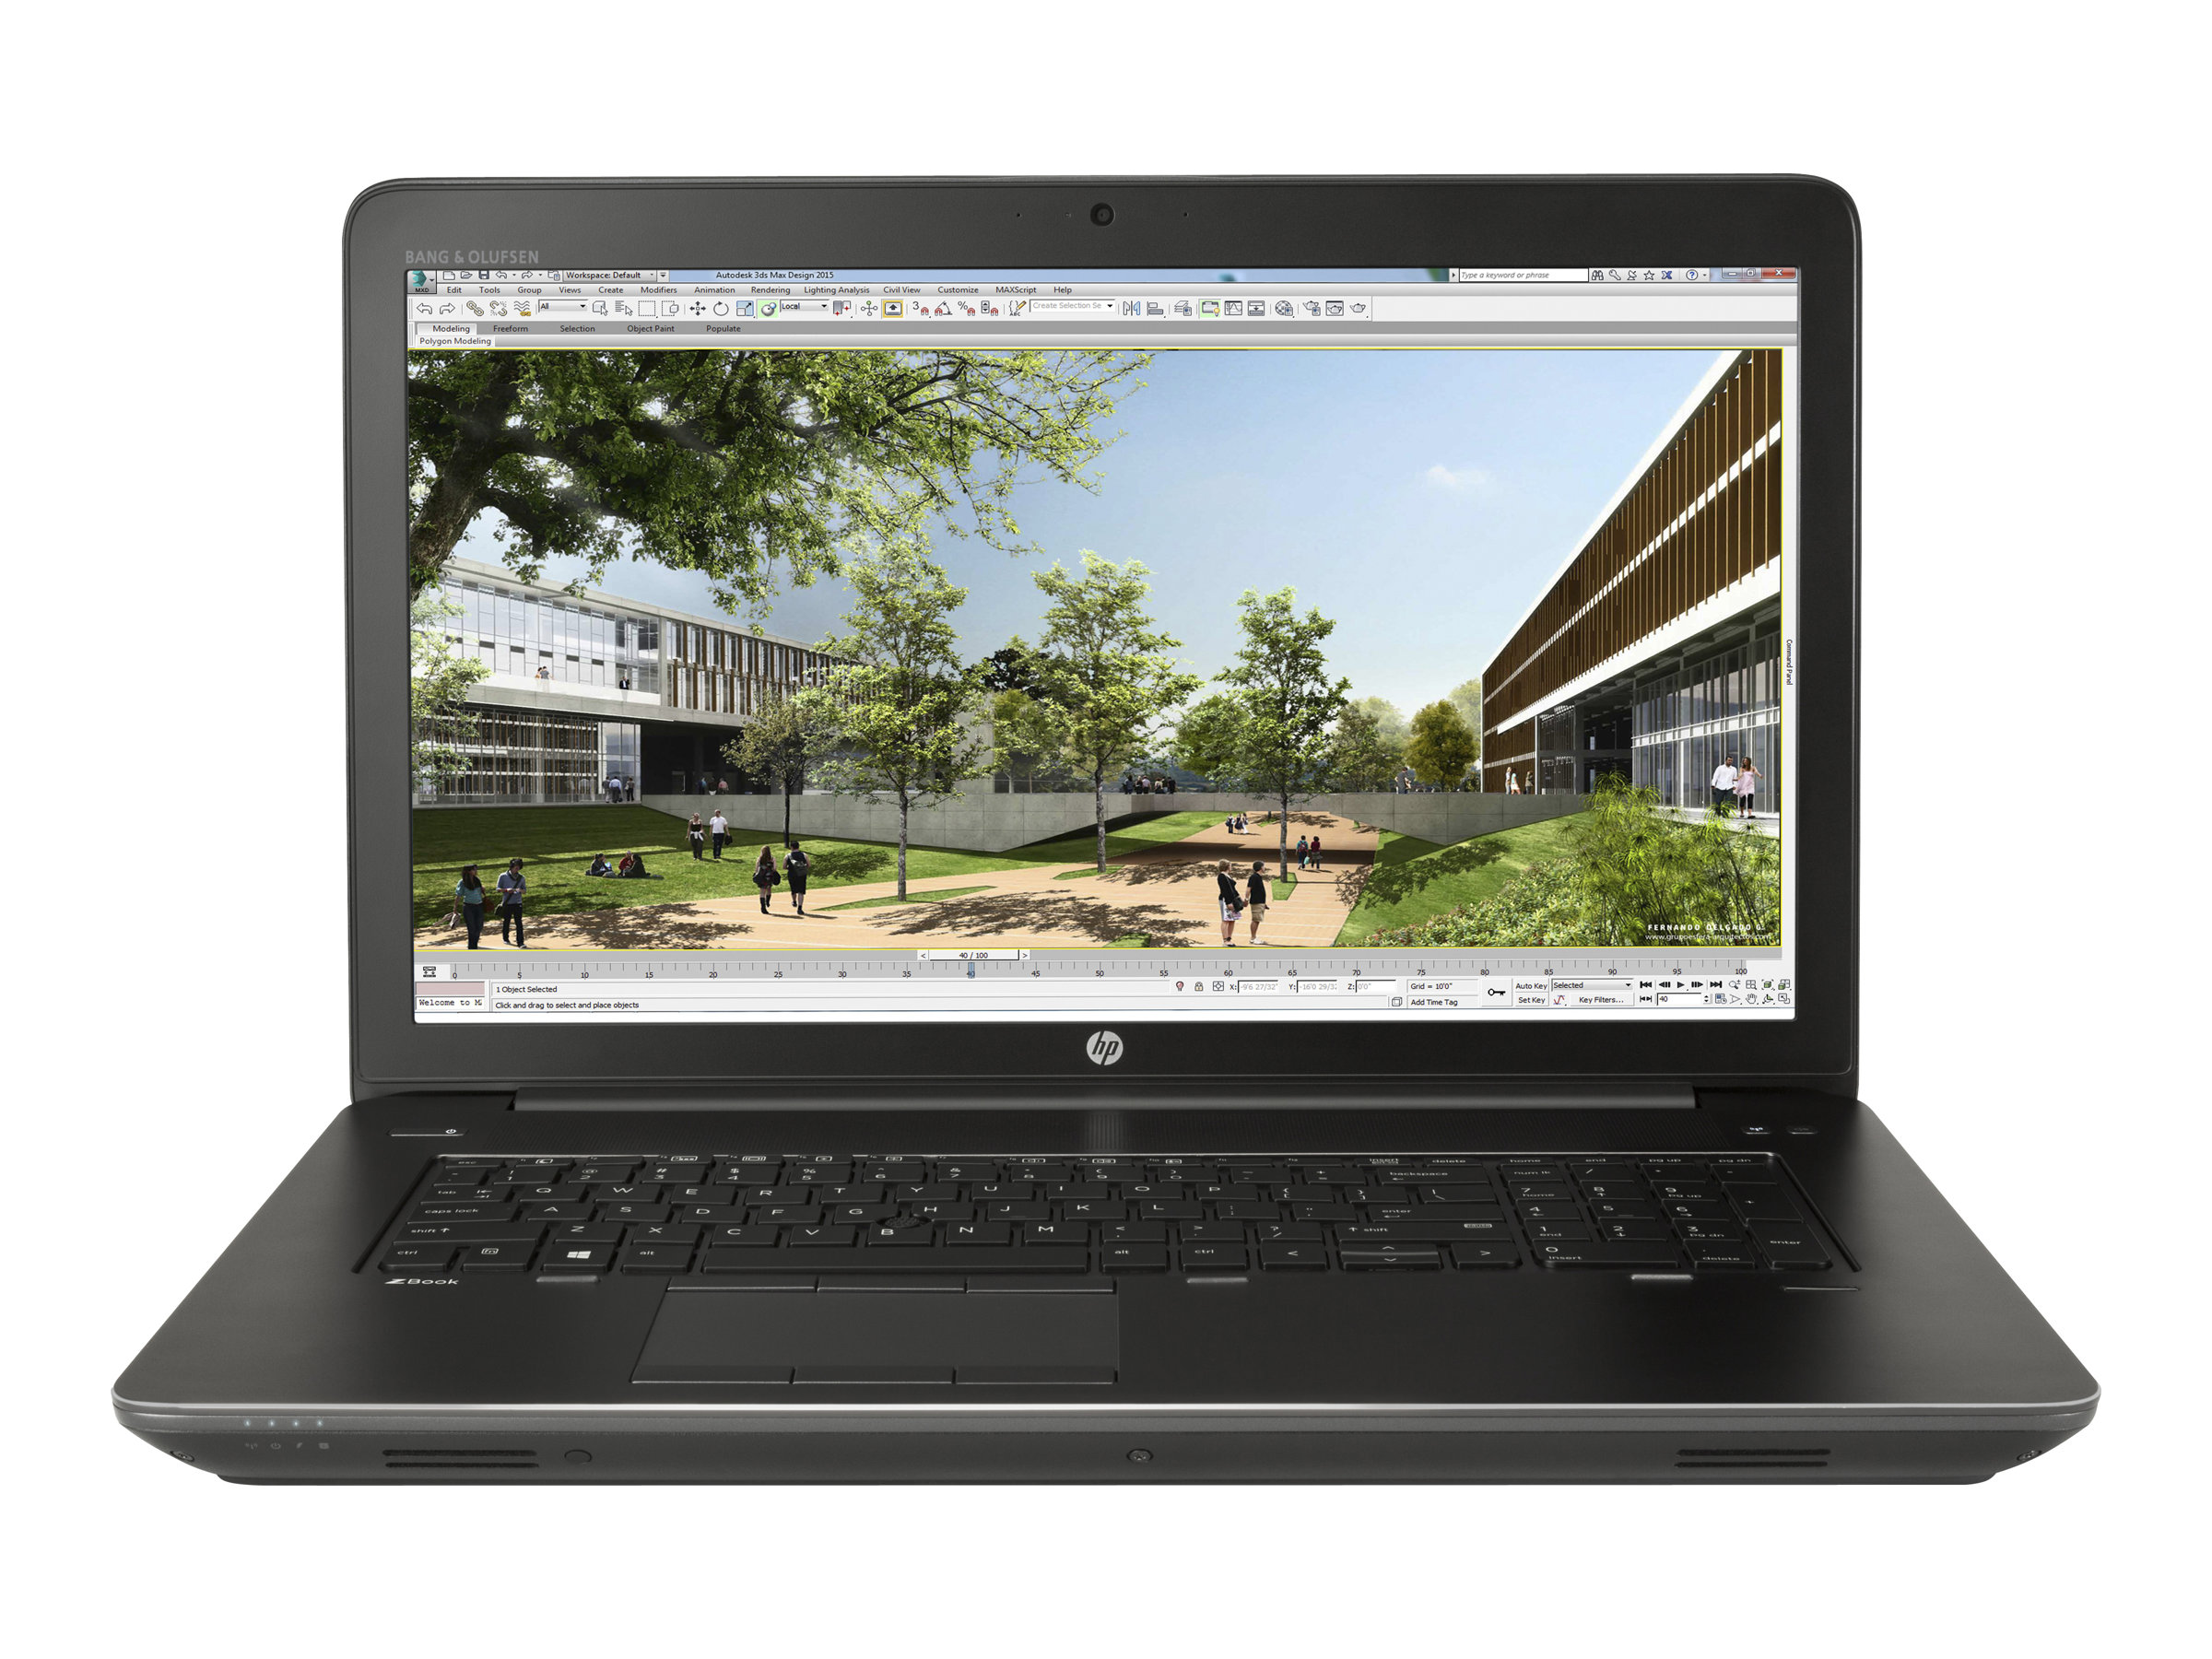 HP ZBook 17 G3 Mobile Workstation - 17.3" - Core i7 6820HQ - 16 GB RAM - 1 TB HDD - image 3 of 14